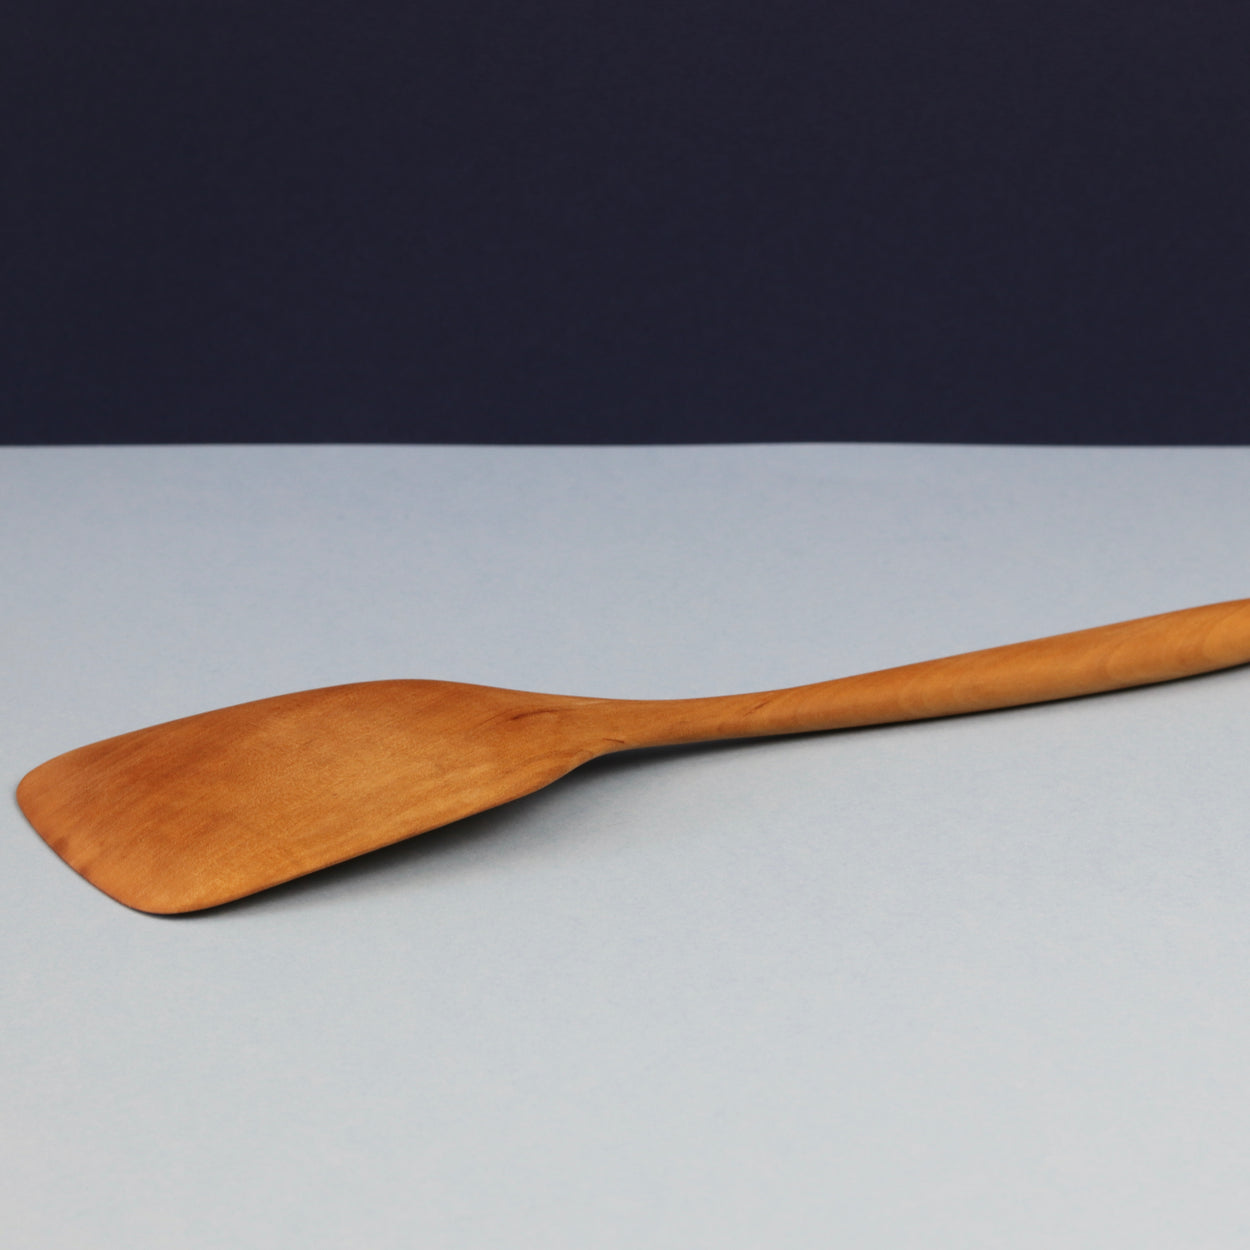 Handmade Pear Wood Kitchen Spatula, lying face down against blue background